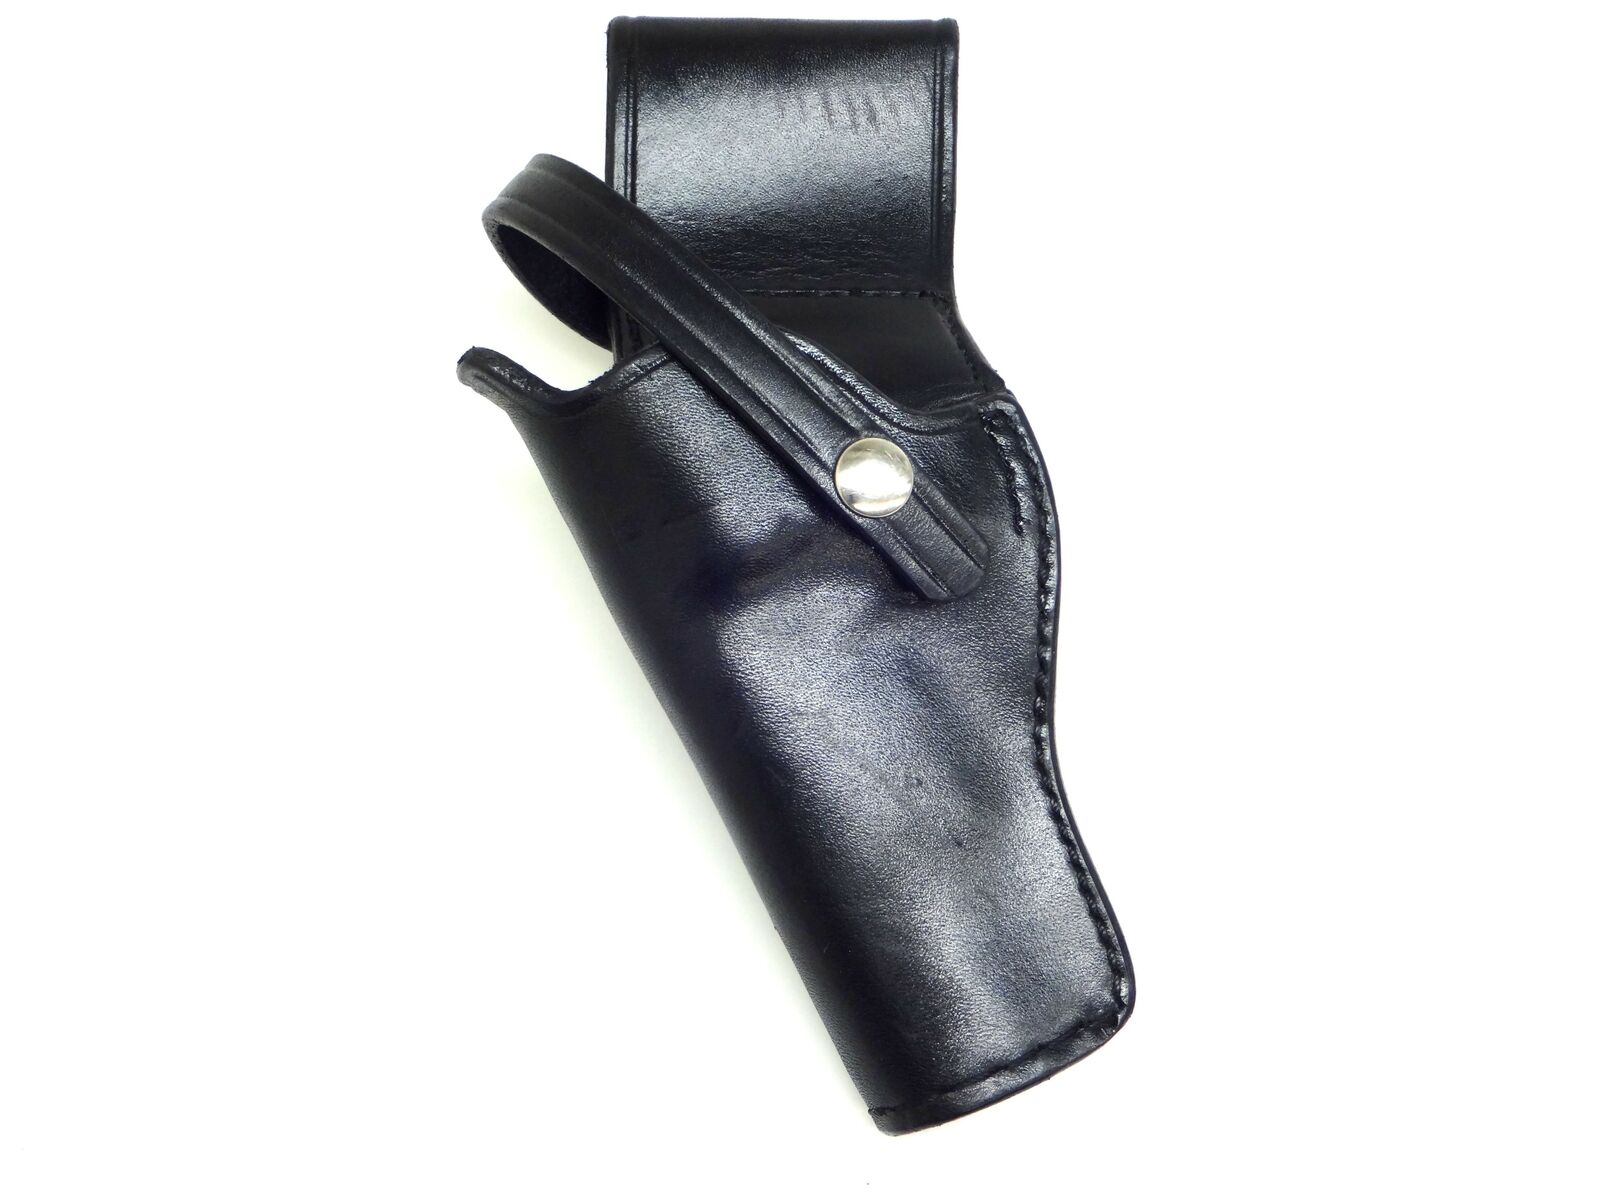 Holster fits 4-inch Revolver, Smith & Wesson, Ruger, Colt